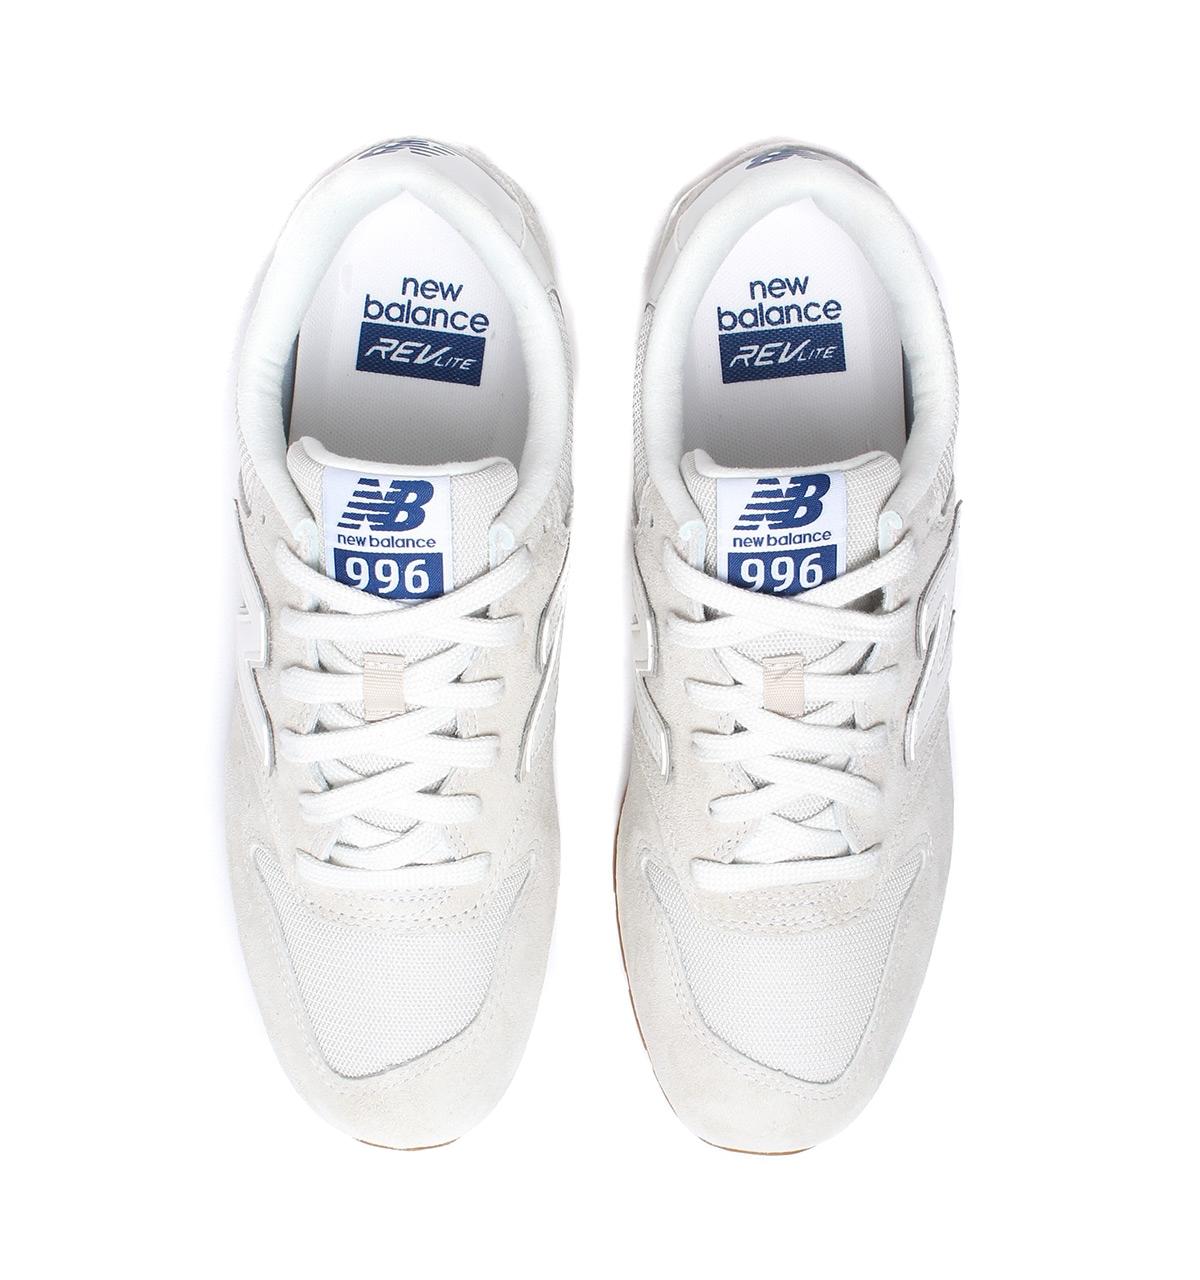 New Balance 996 Sea Salt Suede Trainers in White for Men - Lyst